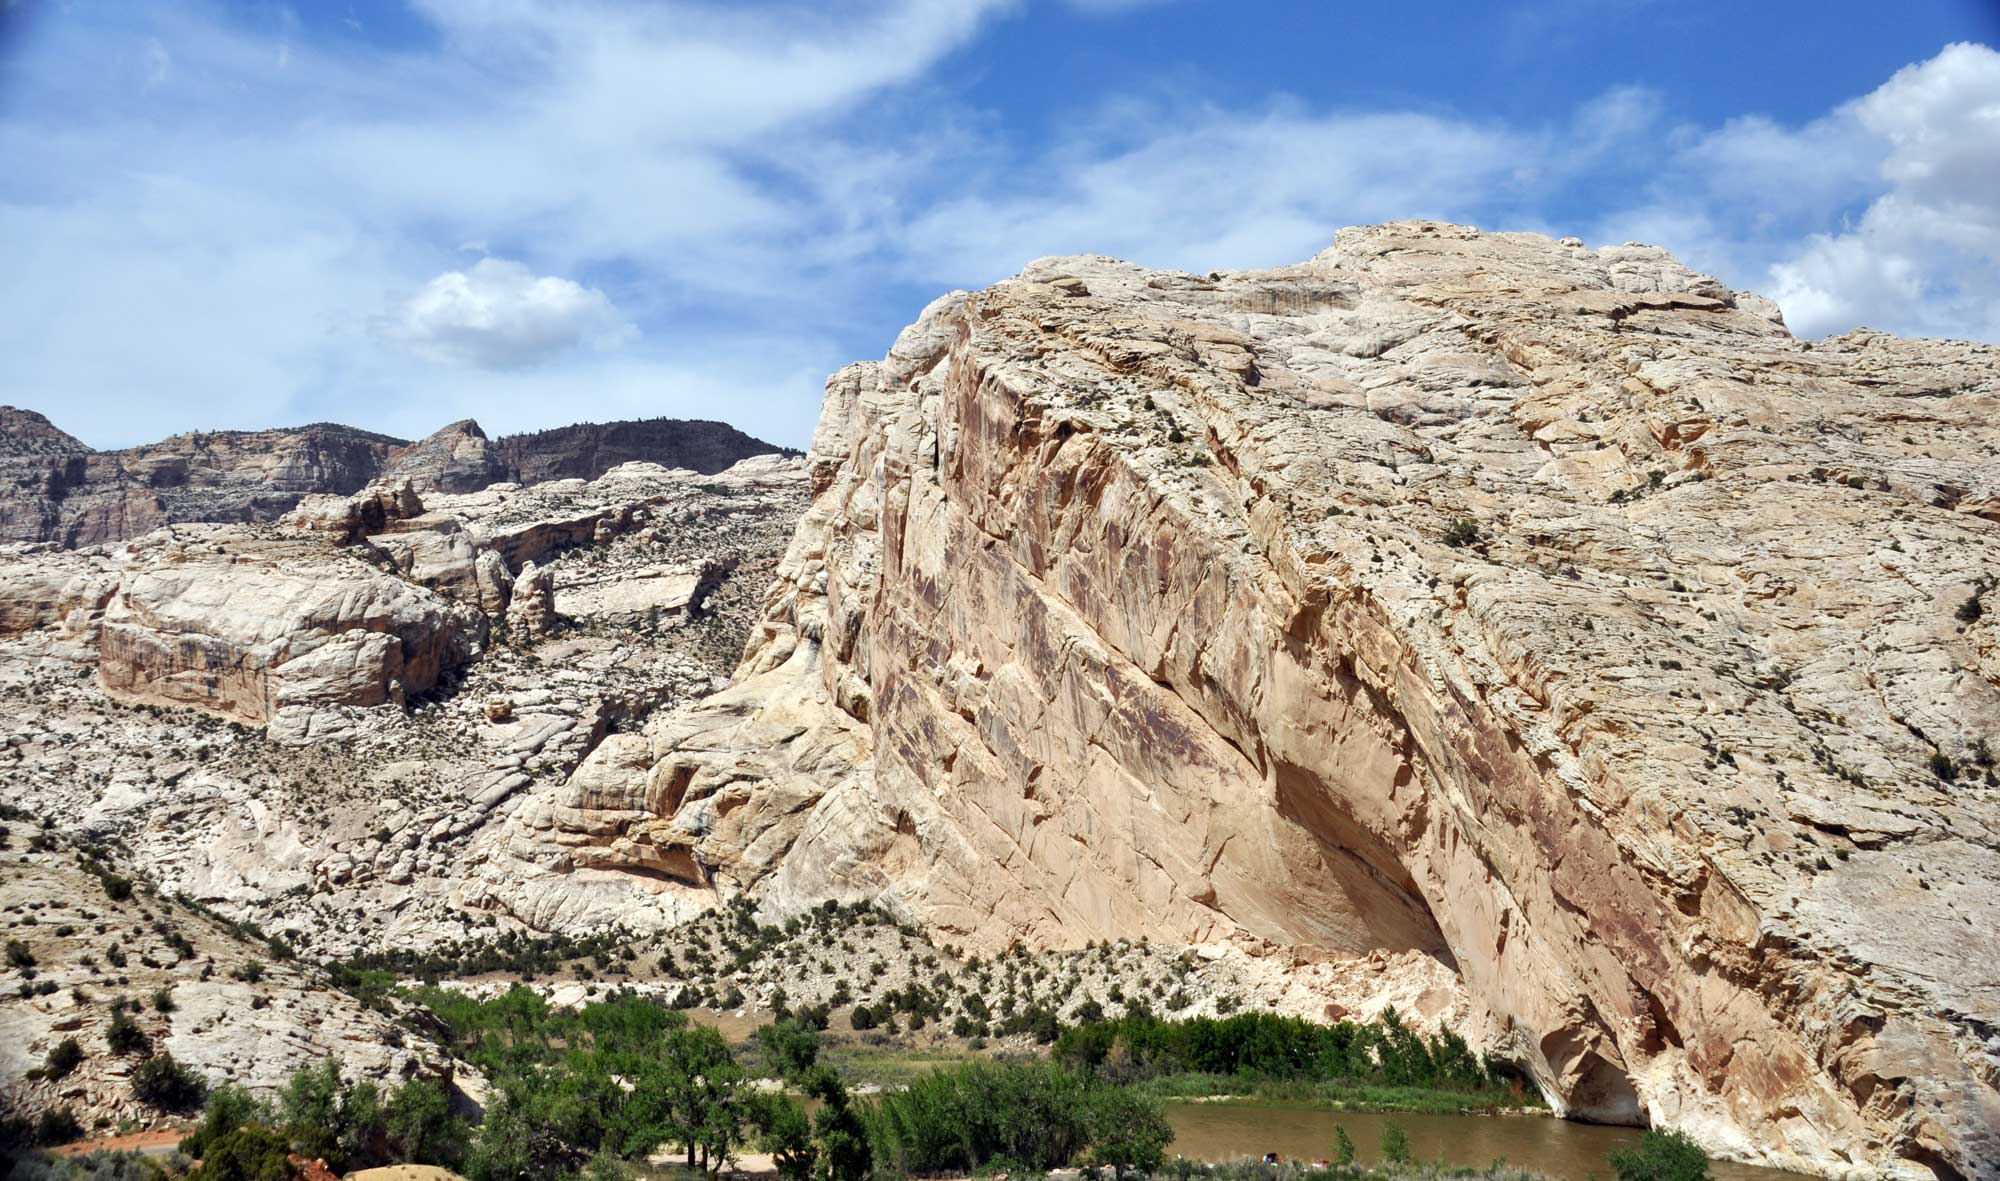 Photo of an outcropping of Weber Sandstone in Utah. The sandstone is beige in color and forms a sloping hill in the foreground.